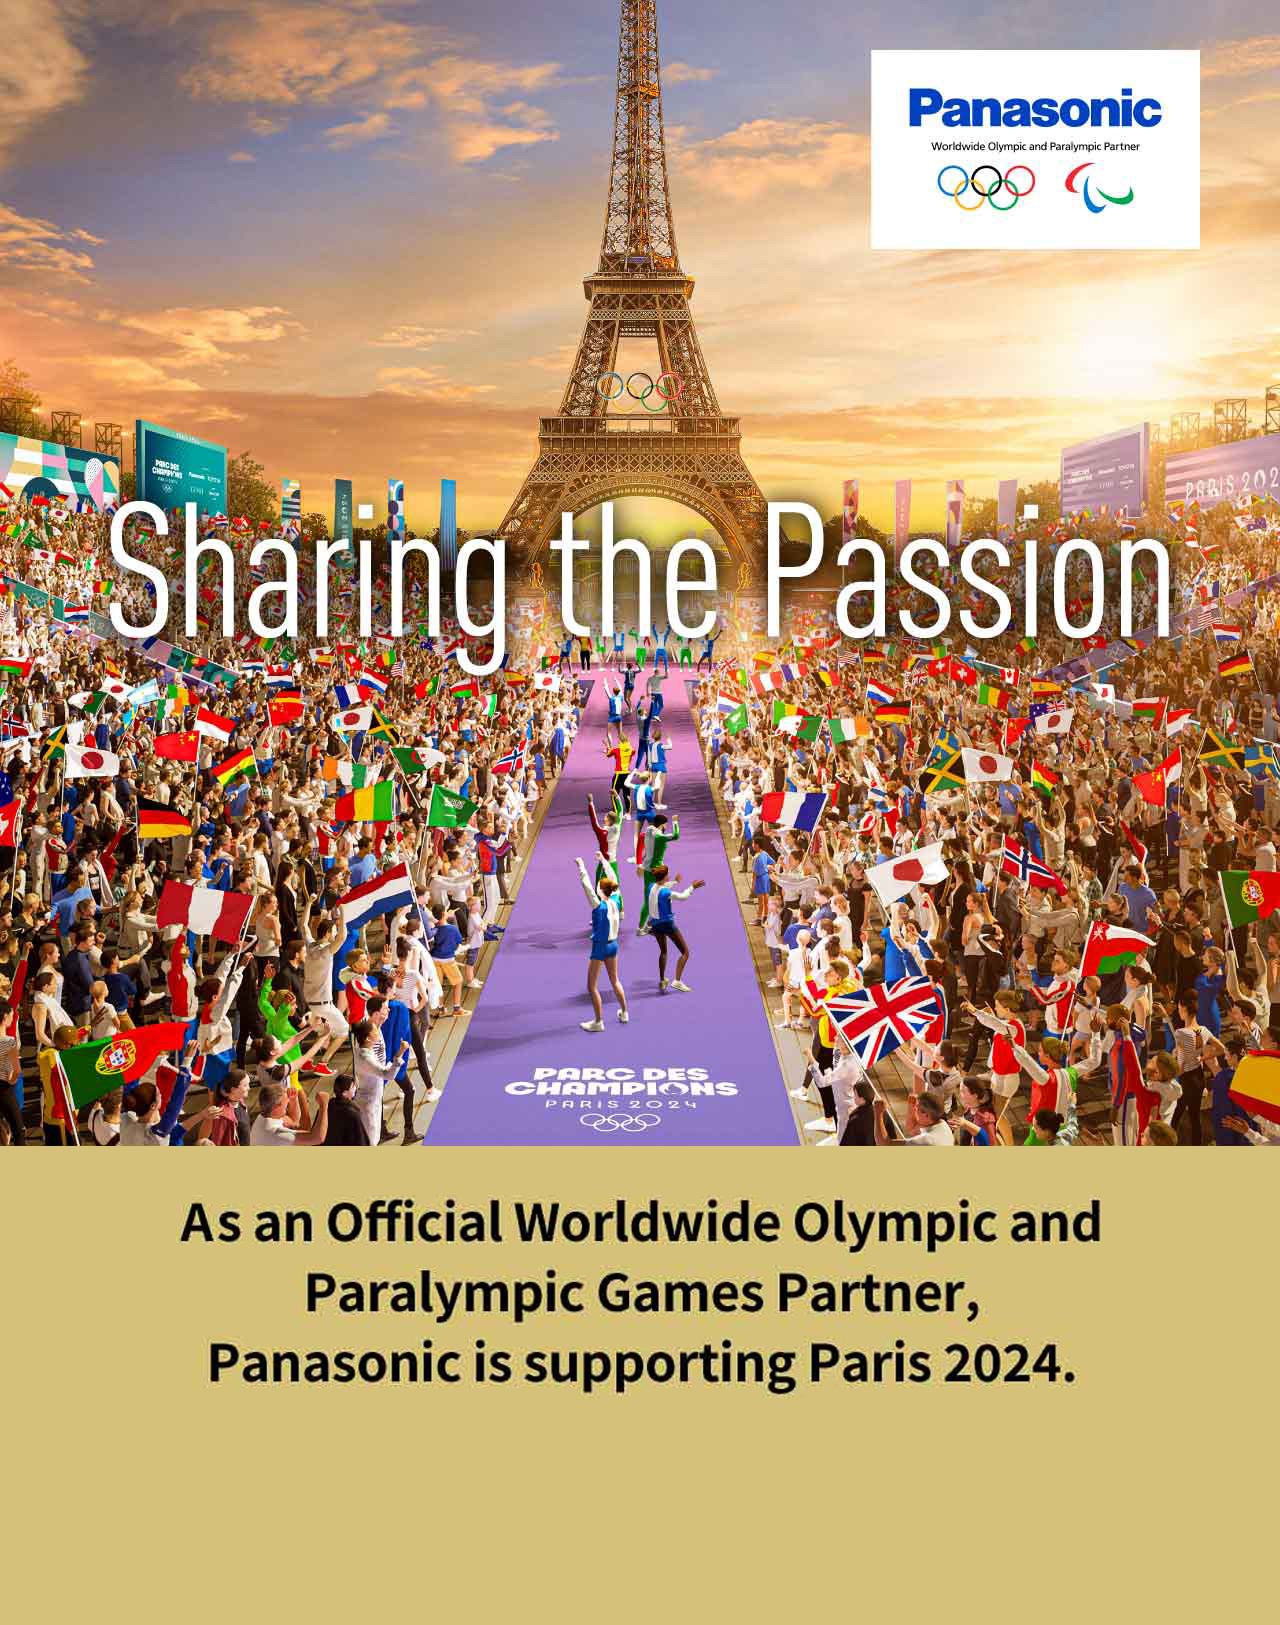 As an Official Worldwide Olympic and Paralympic Games Partner, Panasonic is supporting Paris 2024.